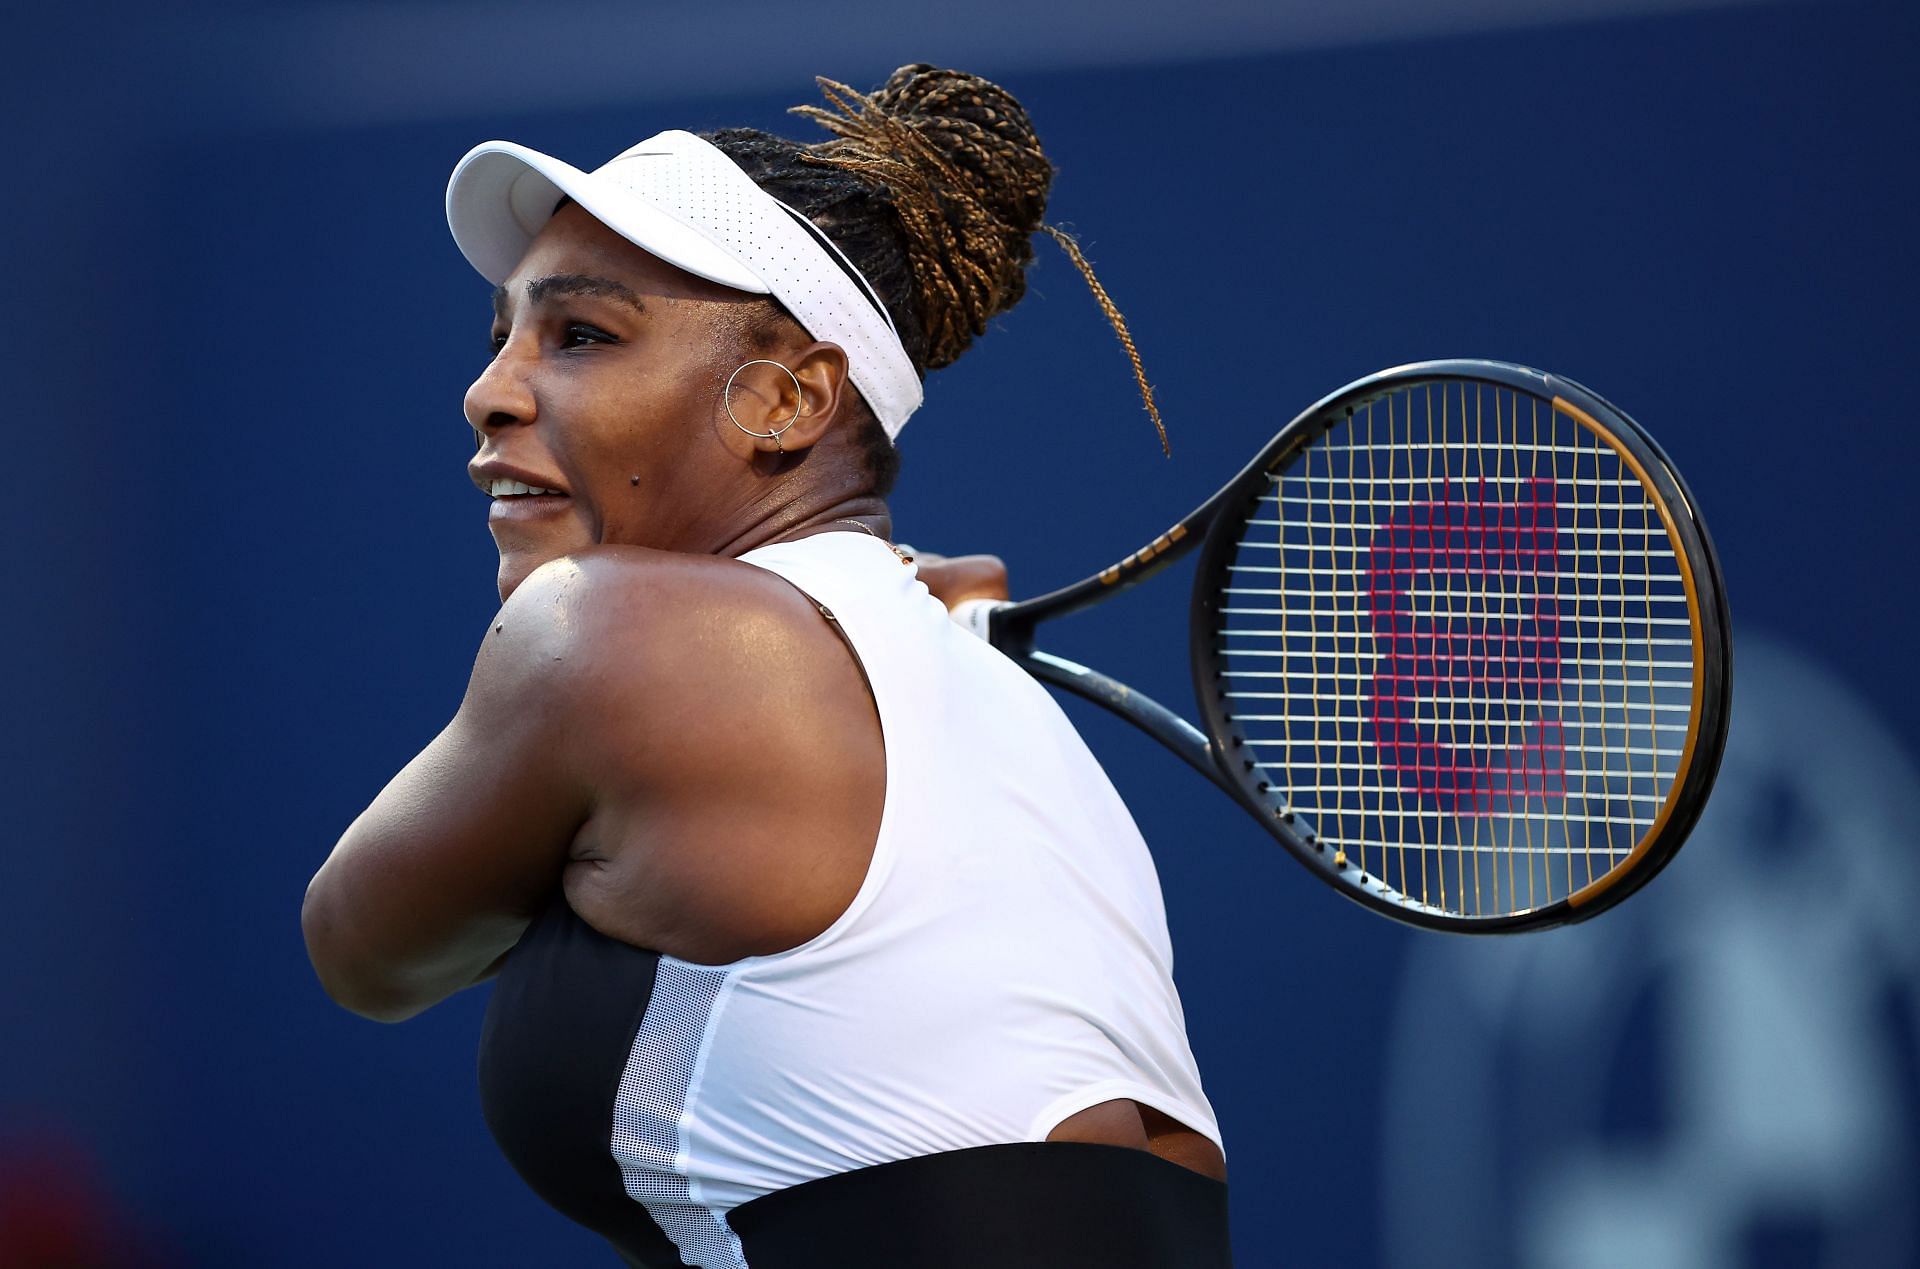 Serena Williams is set to play the Western &amp; Southern Open one last time